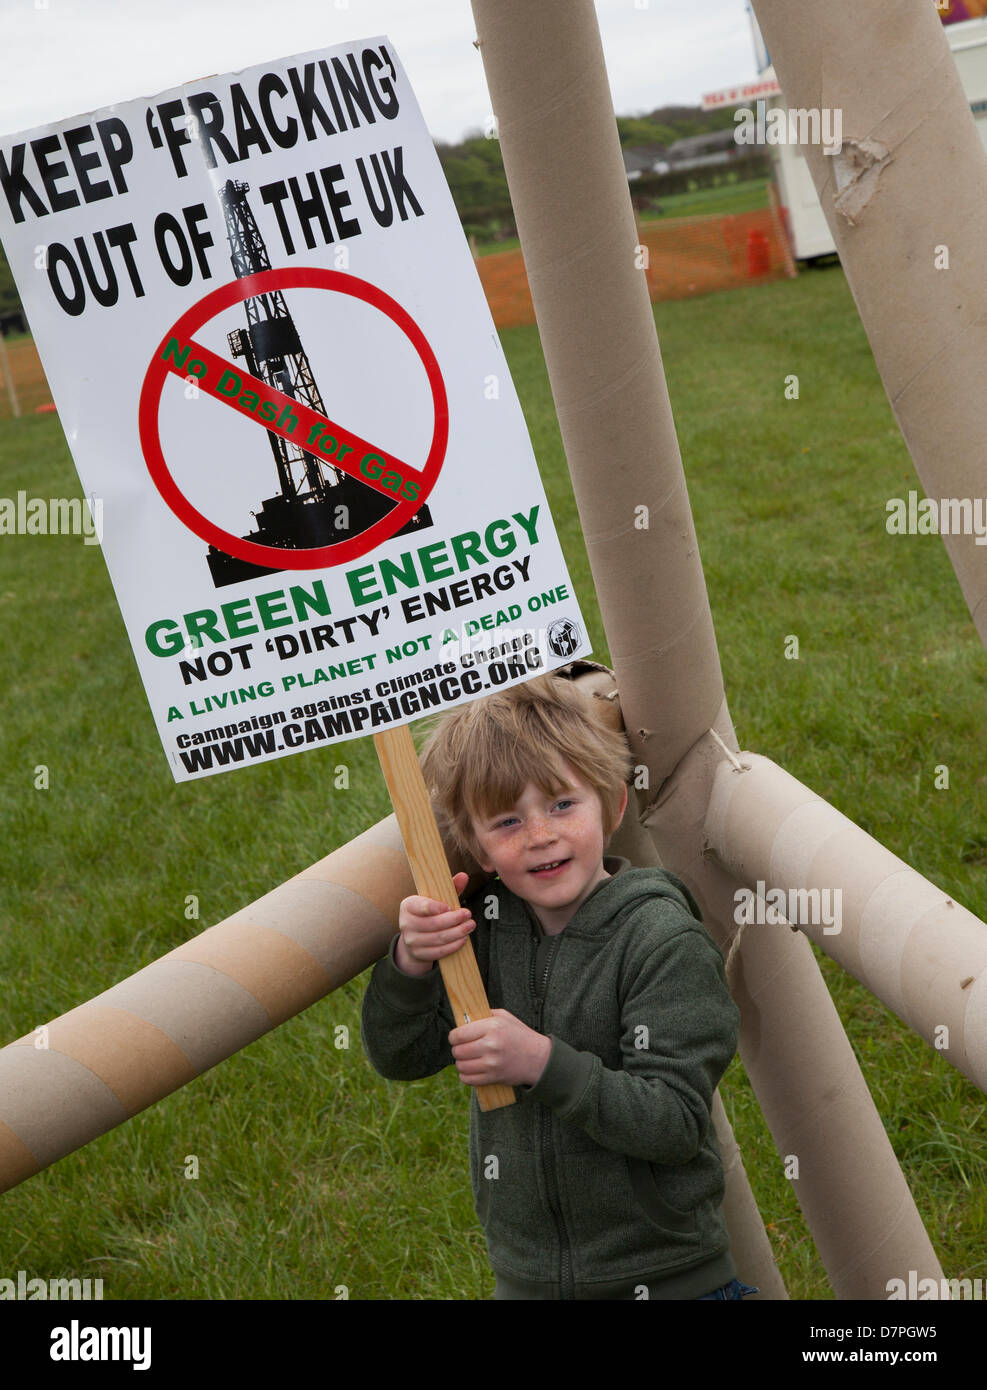 Southport, UK 12th May, 2013.  Dylan Stopforth Kemp,  8 at  Camp Frack 2 a weekend of activity in opposition to Fracking & other forms of Extreme Energy. This event organised by a coalition of local and national anti-fracking, Trades Union and environmental groups including Campaign against Climate Change, REAF, RAFF, FFF, Merseyside against Fracking, Friends of the Earth & Gtr Manchester Assoc. of Trade Union Councils, Frack Off.  In September 2011 groups organised Camp Frack (1) to protest against plans by Cuadrilla Resources to drill for shale gas. Conrad Elias/Alamy Live News Stock Photo